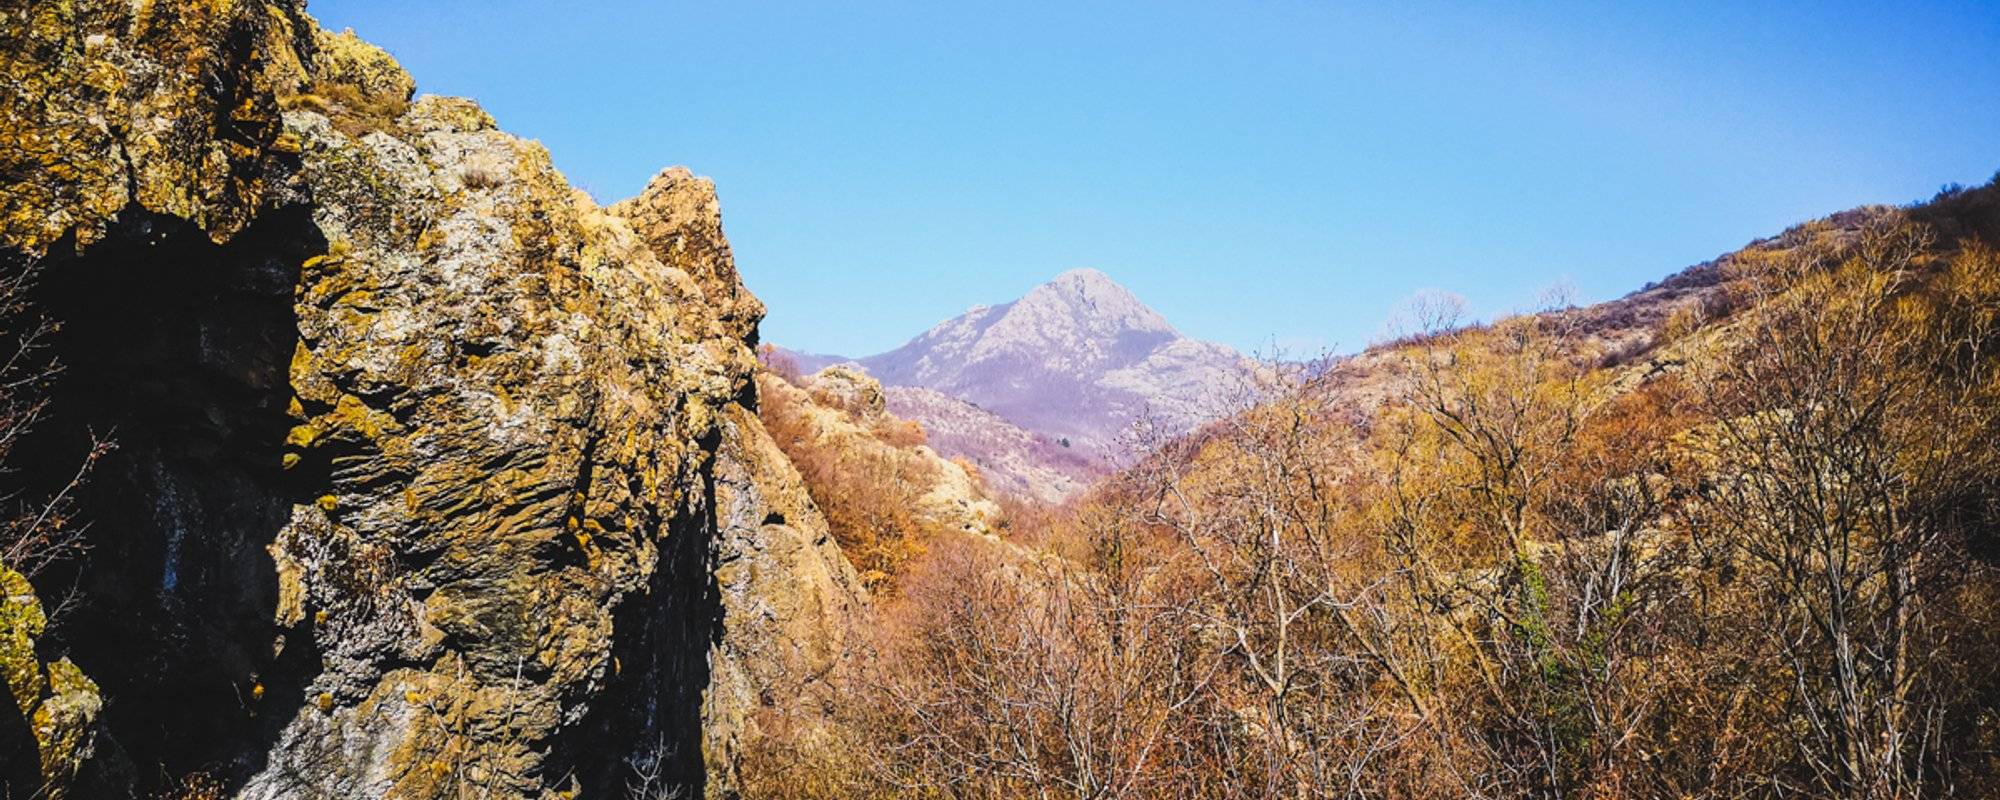 On the rocks of Sliven 🧗🏻‍♀️: Аrea Dolapite and Deep Valley